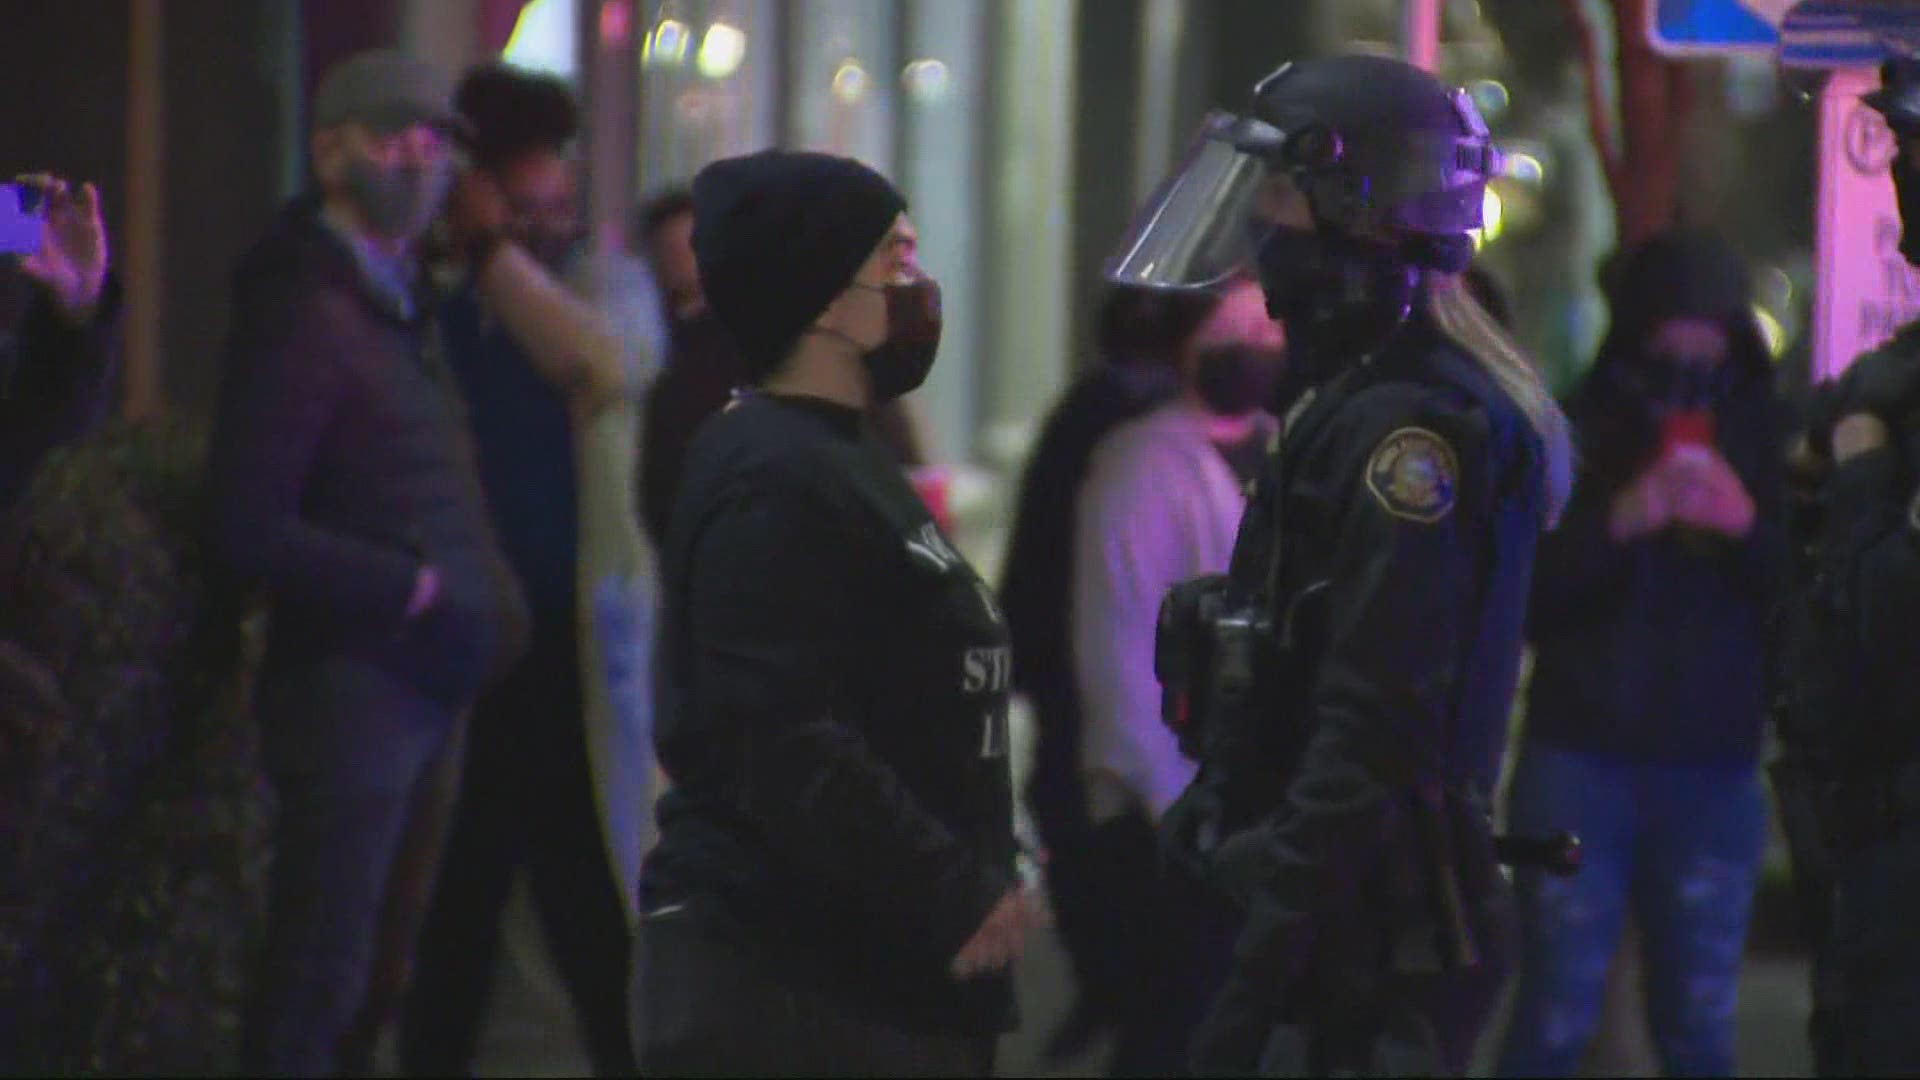 On the second consecutive night of Portland protests, police detain people in Pearl District, including credentialed media.